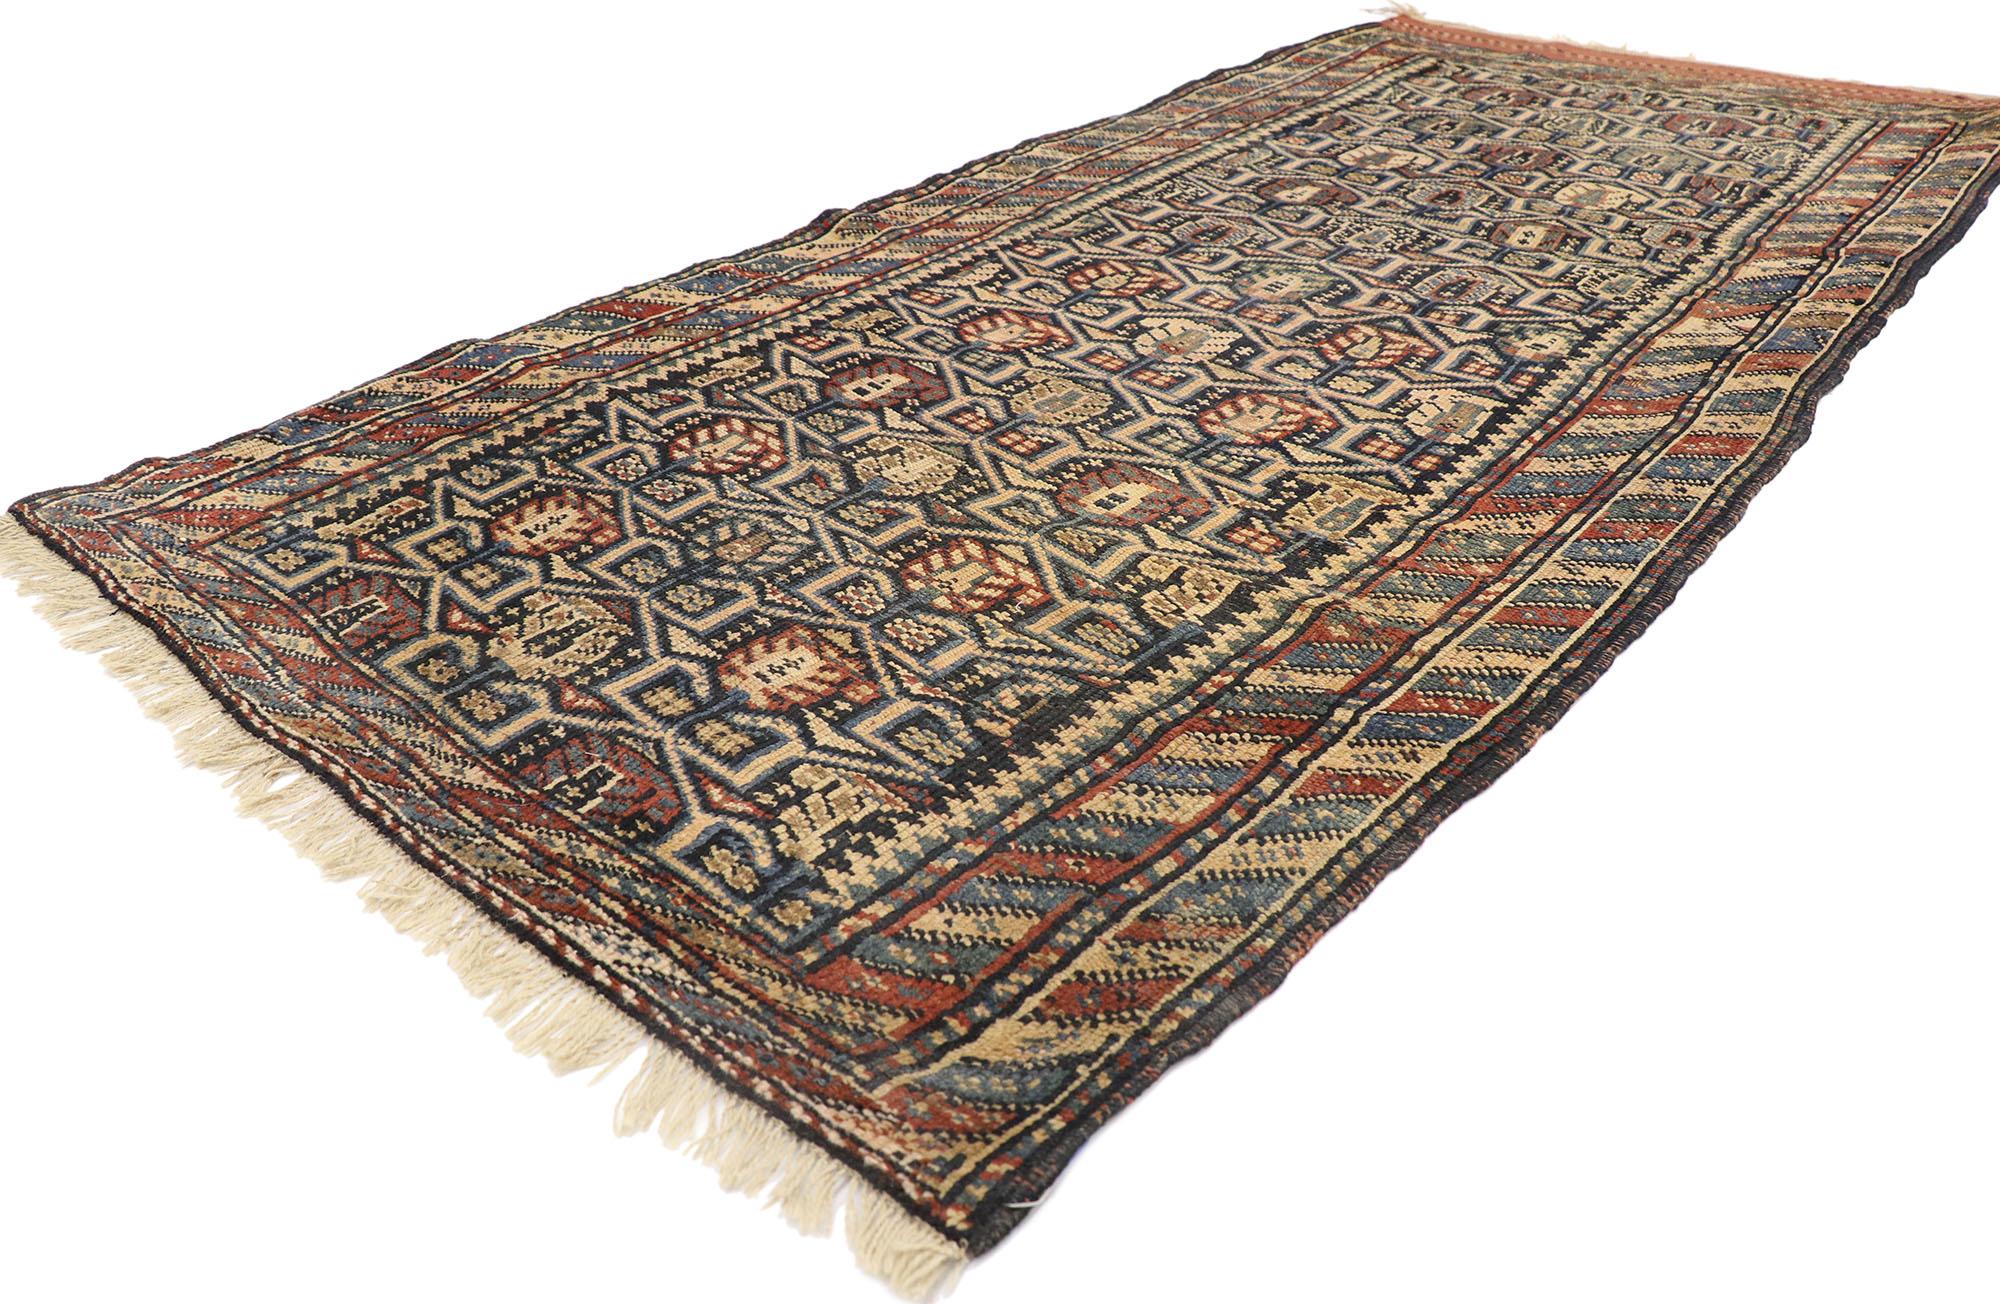 60946 Antique Persian Azerbaijan runner with boteh and barber pole 03'04 x 07'01. With rustic charm and timeless appeal in an earthy-inspired colorway, this hand knotted wool antique Persian Azerbaijan rug runner can beautifully blend modern,